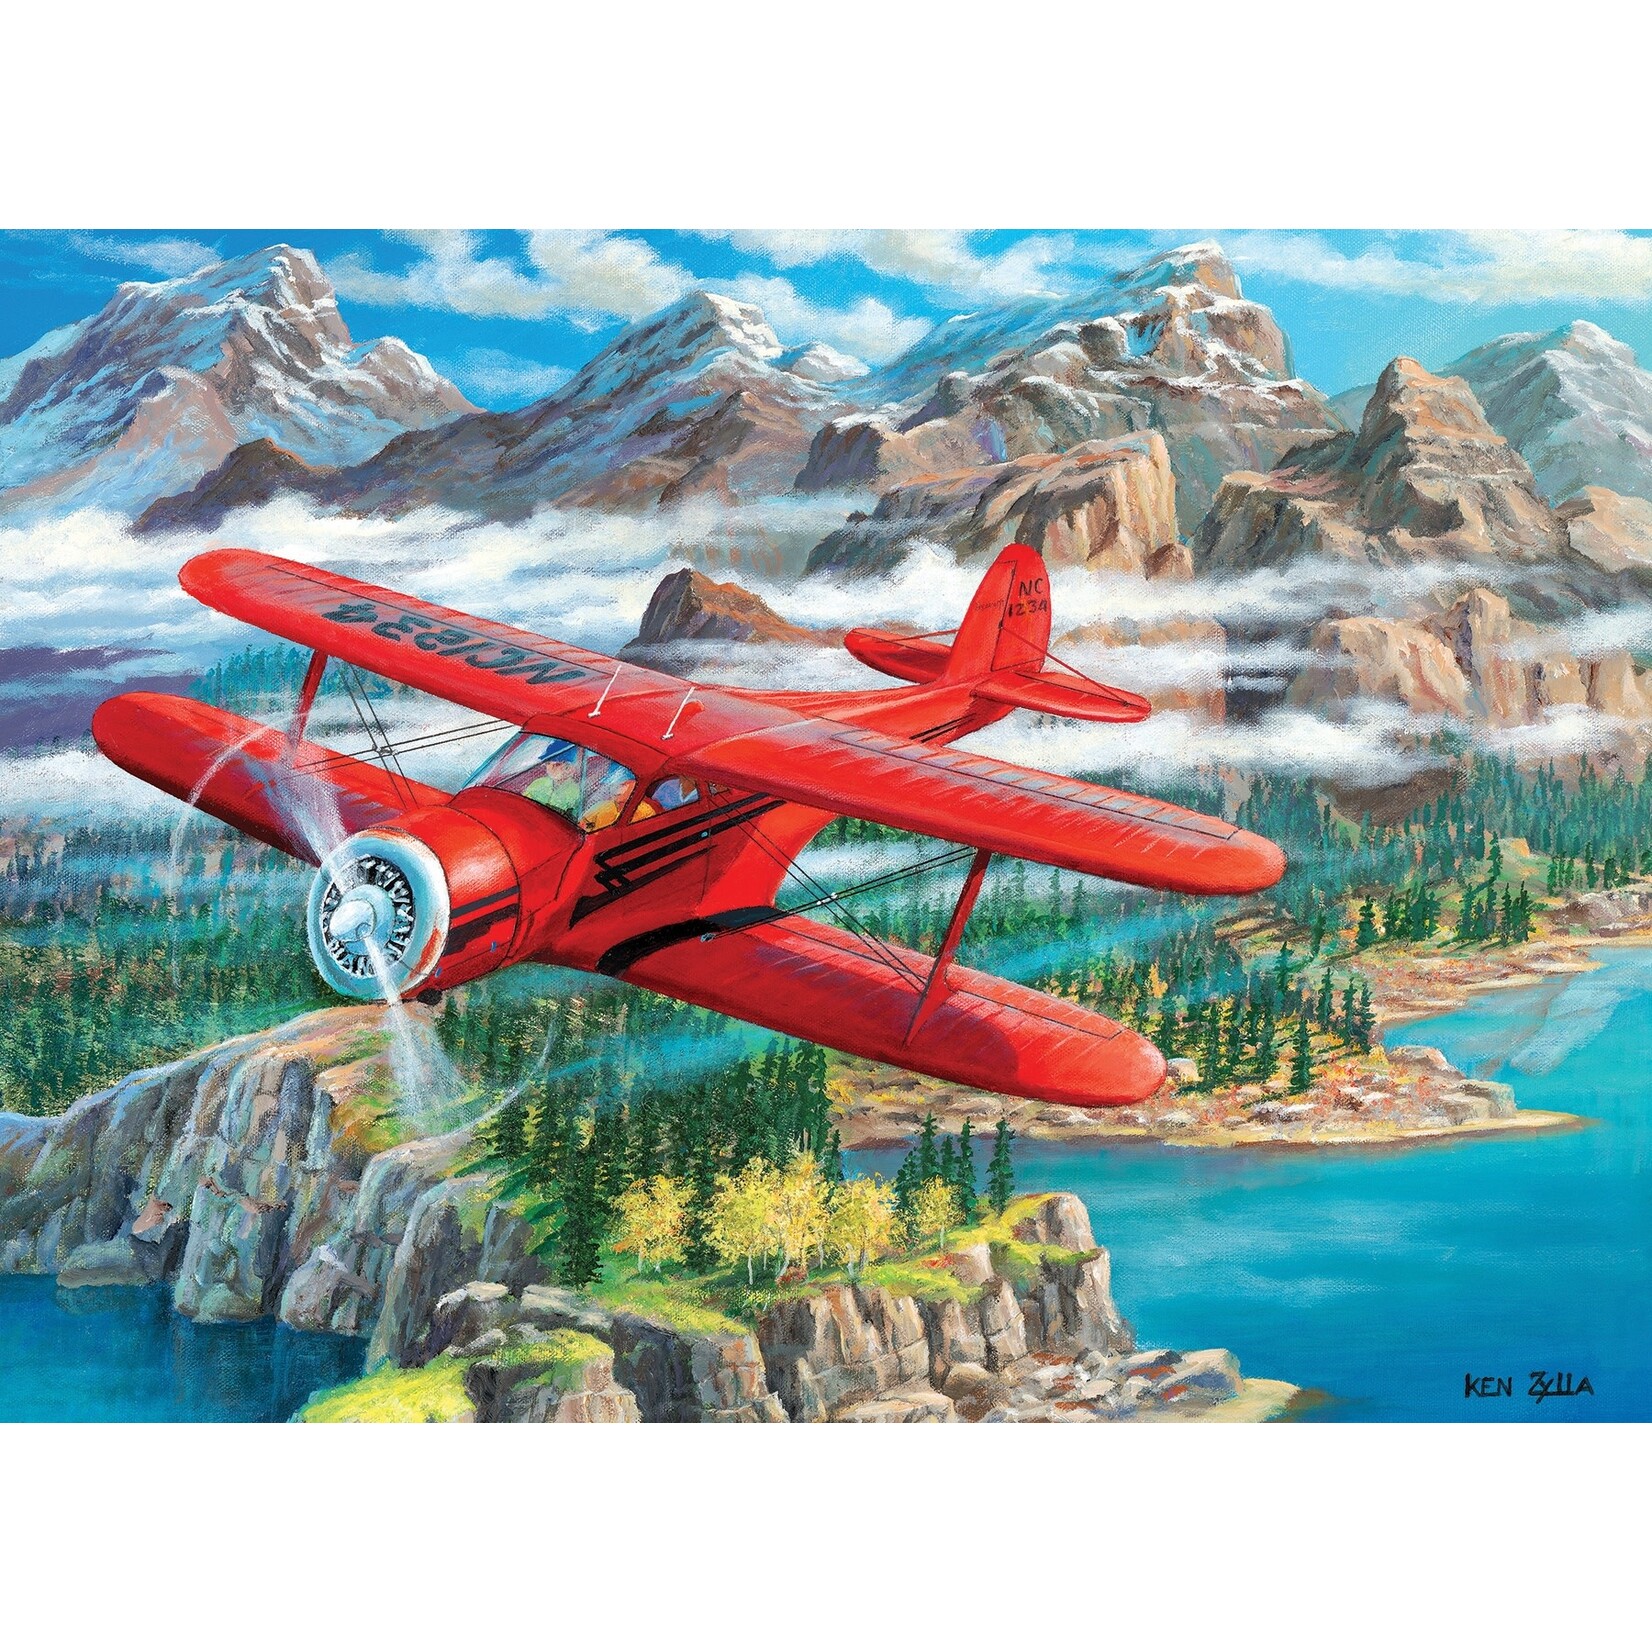 Cobble Hill Beechcraft Staggerwing 500pc Puzzle